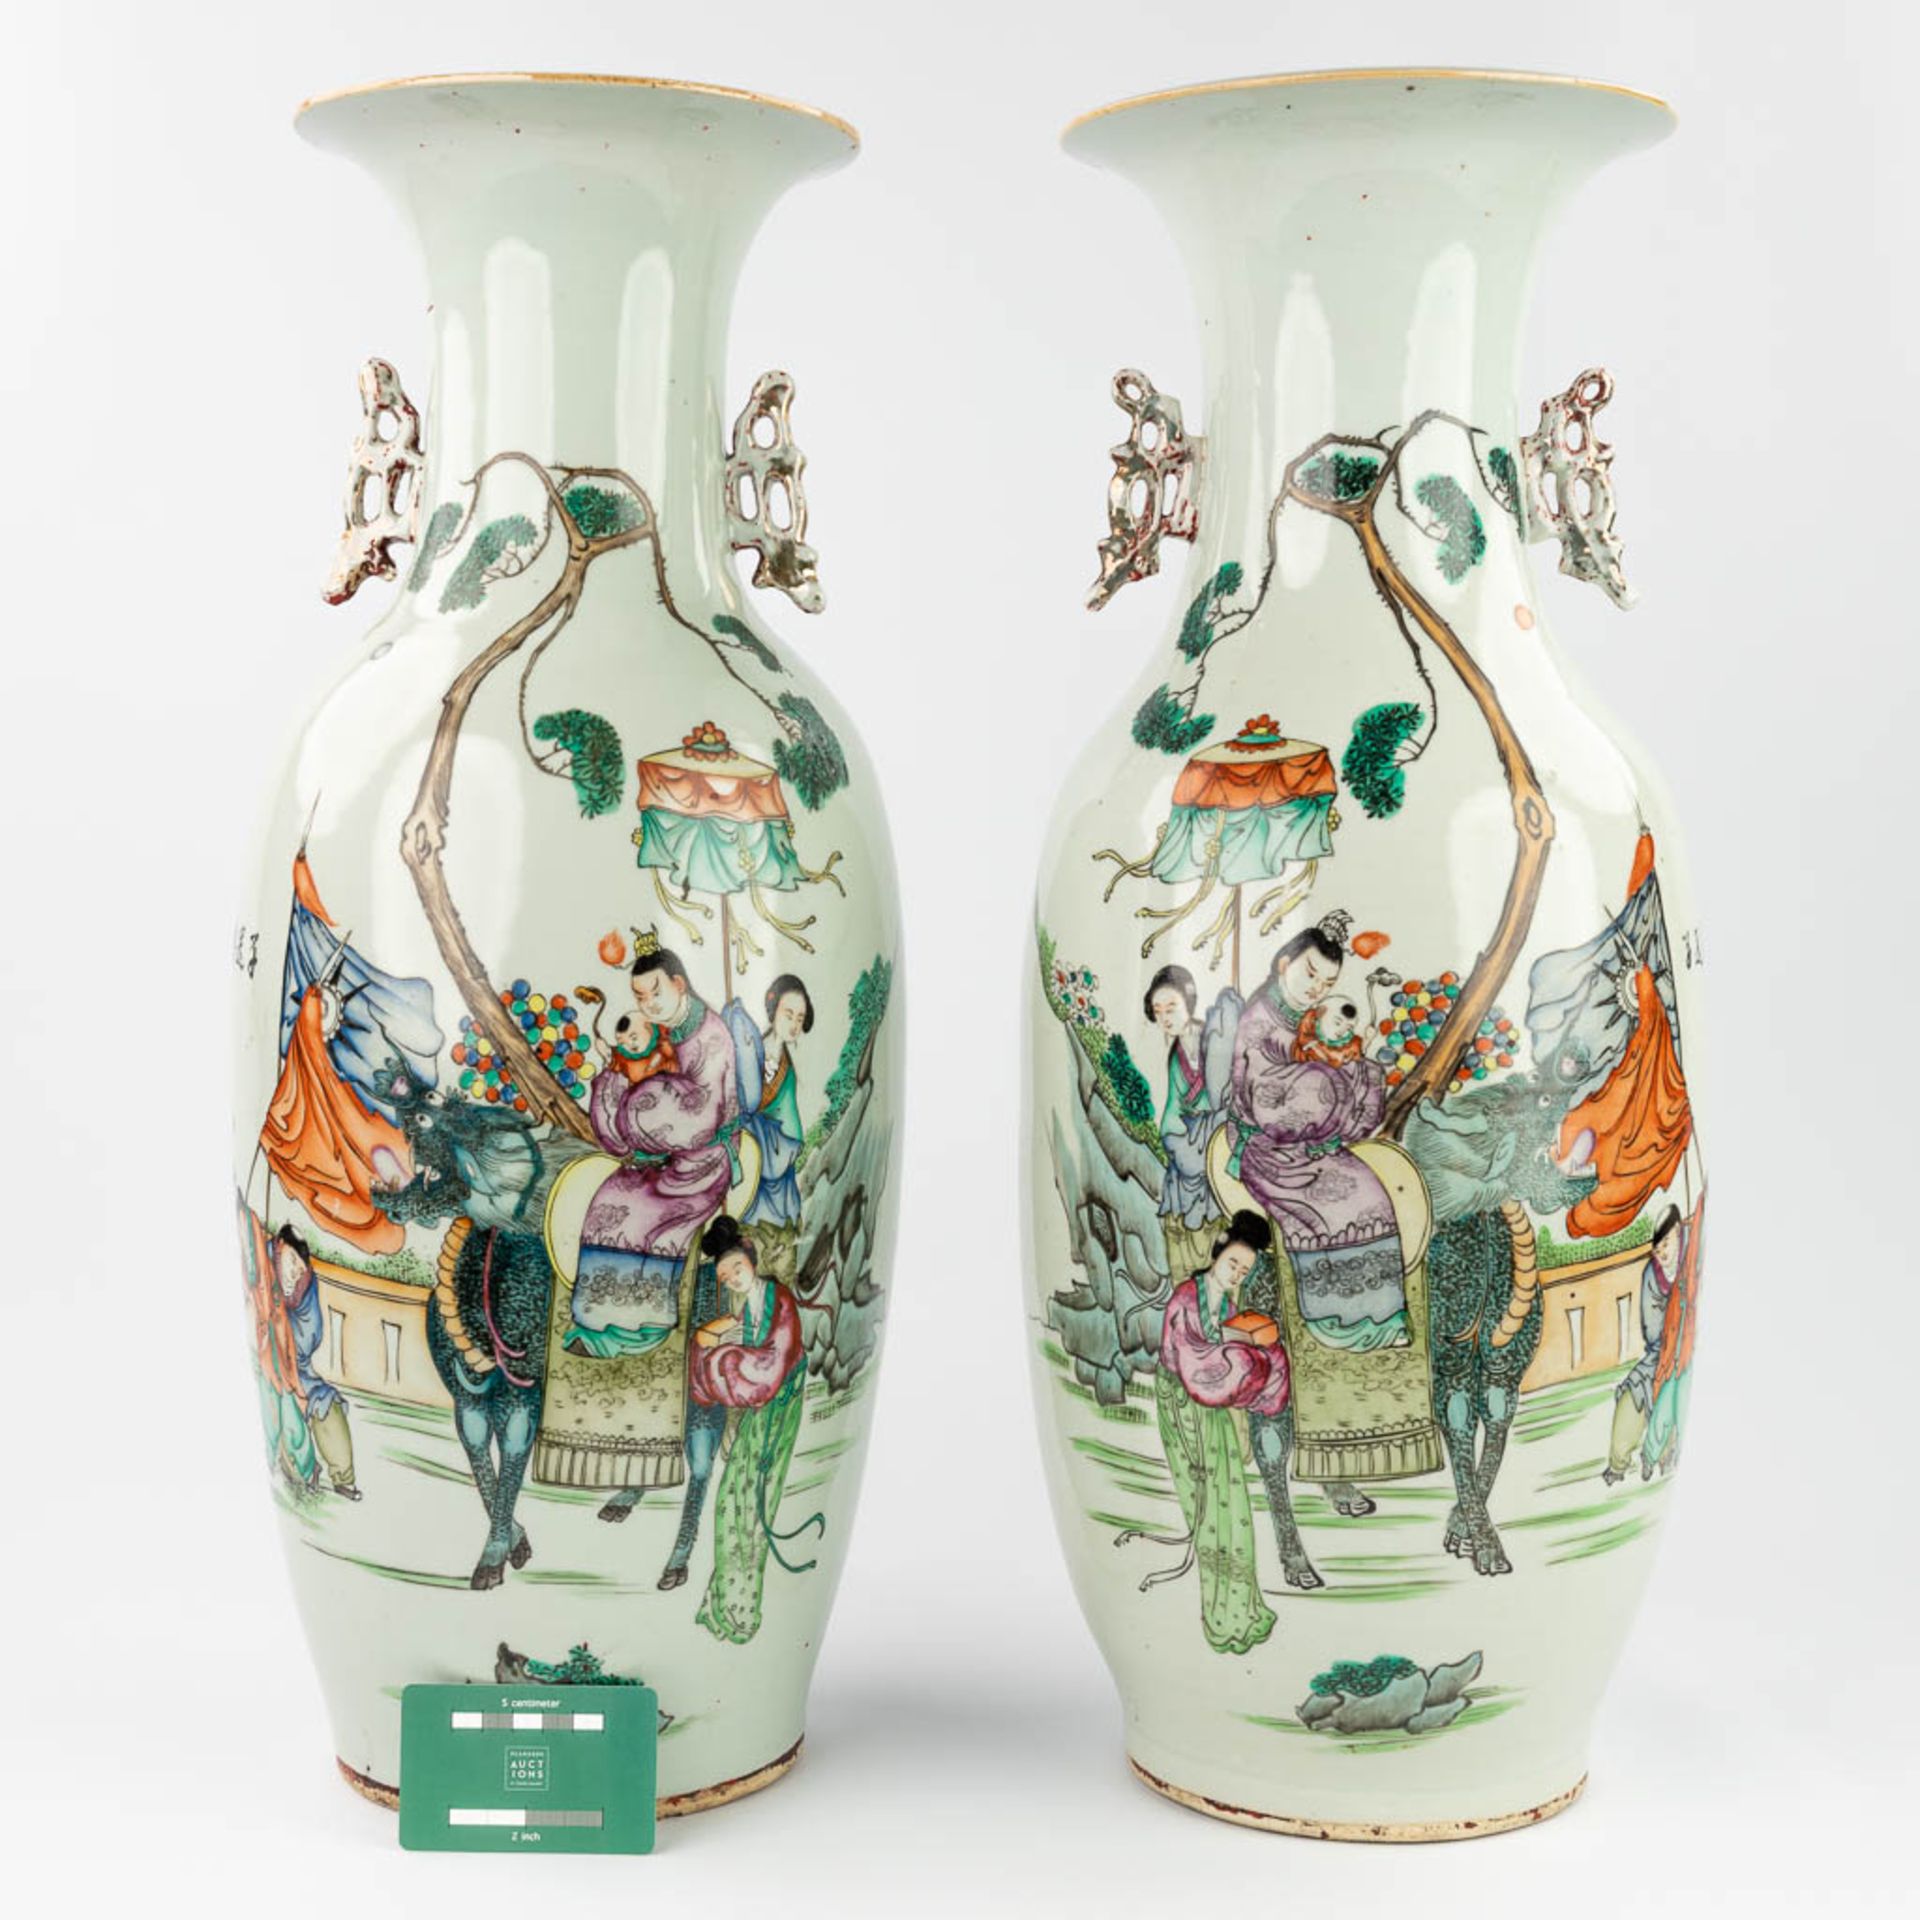 A pair of Chinese vases made of porcelain and decorated with mythological figurines. (58 x 22 cm) - Image 8 of 13